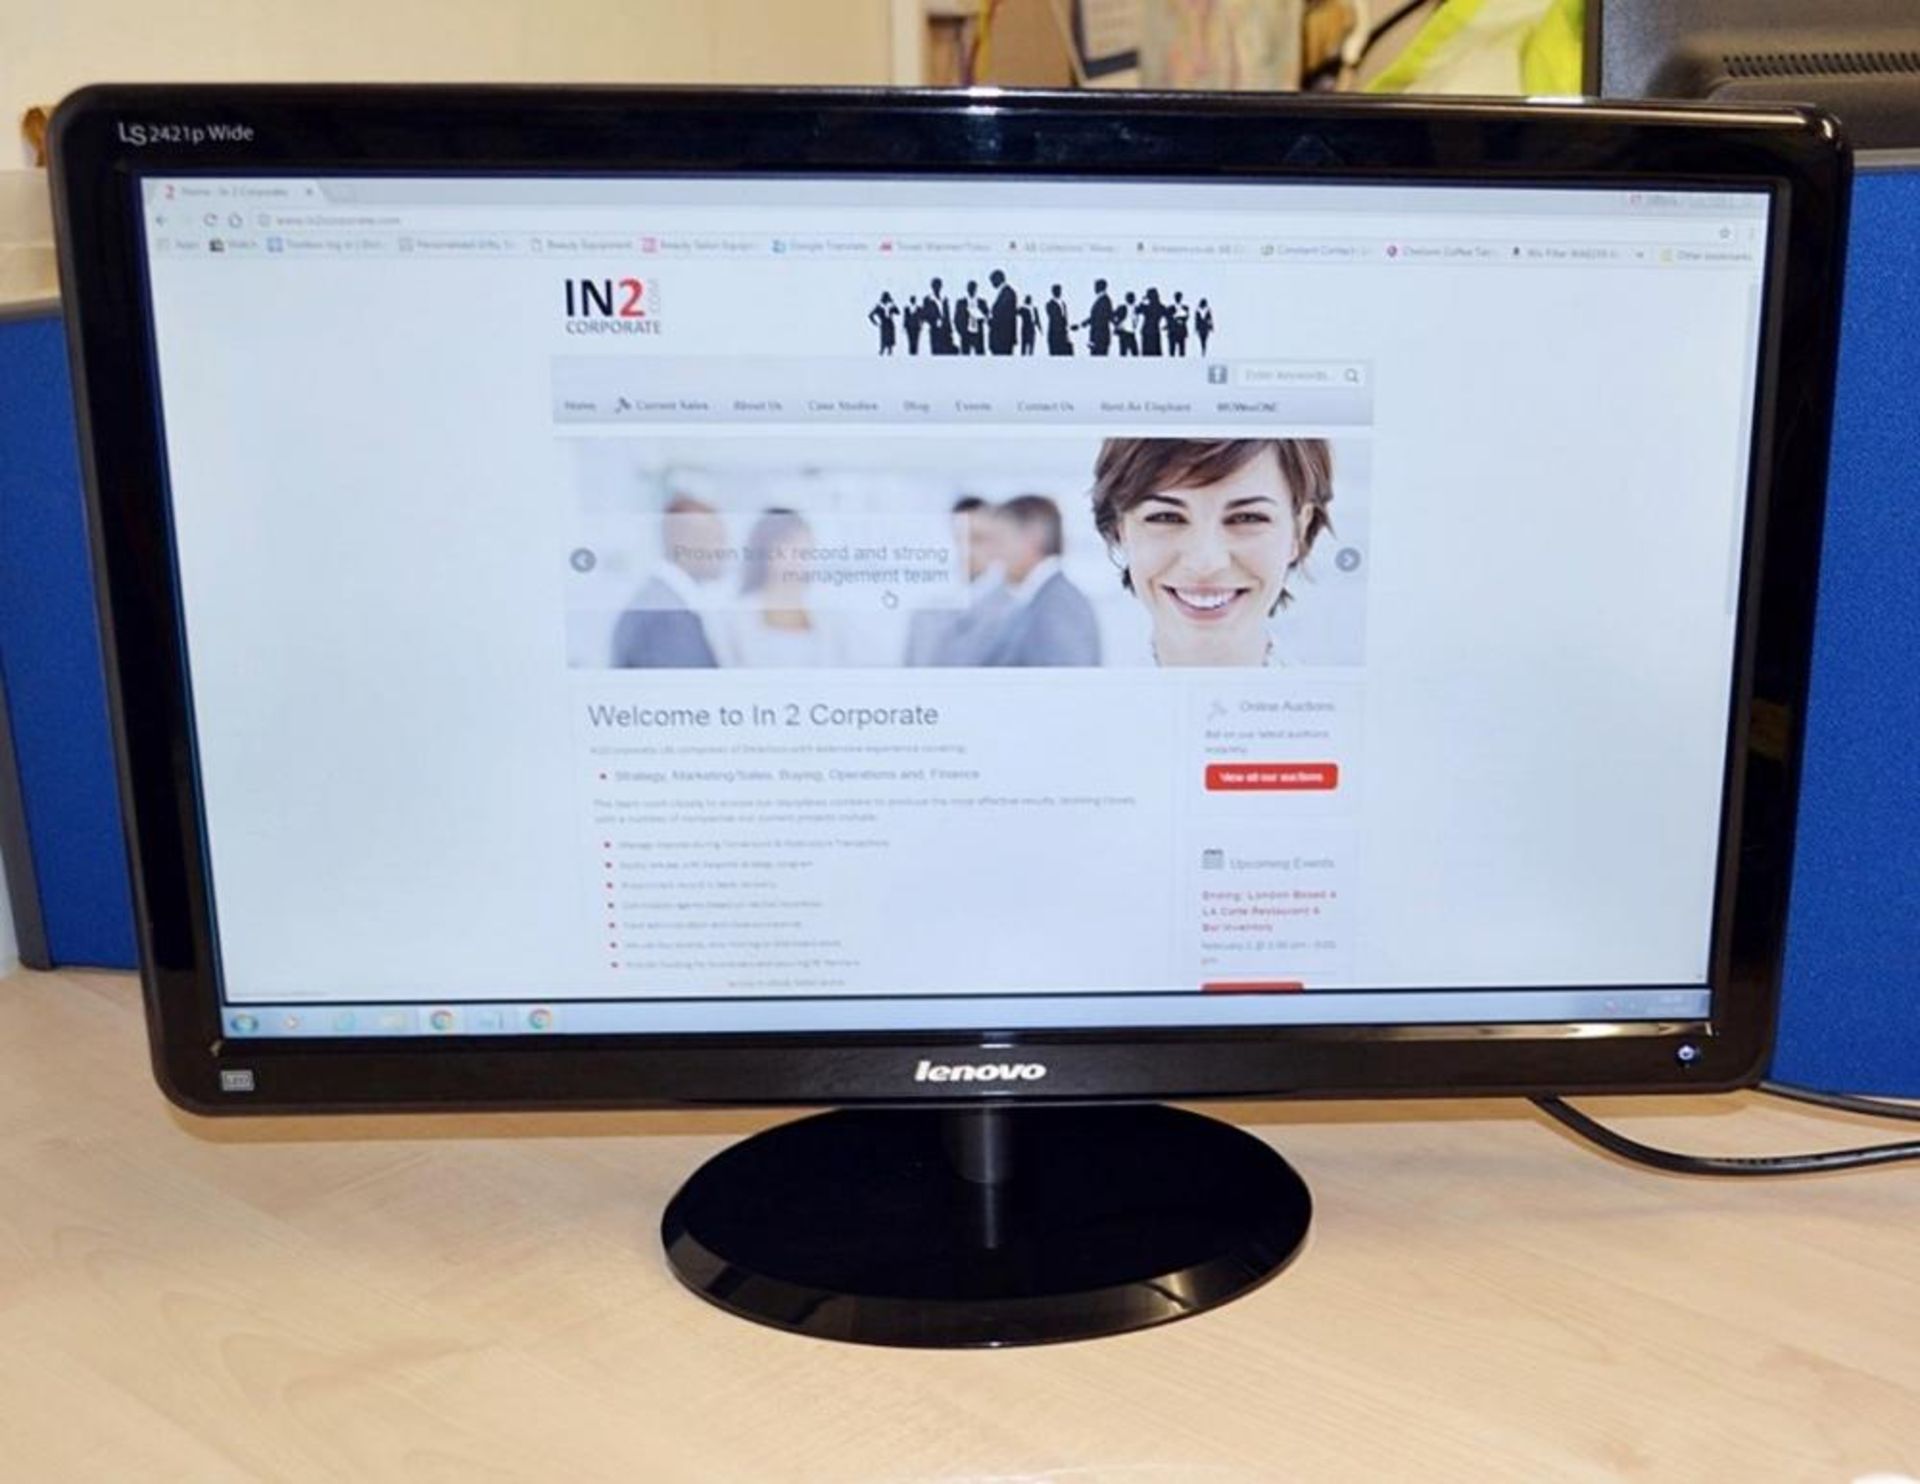 1 x Lenovo LS2421p Wide 23.6" Full HD LED TFT Monitor (Model: 4015-LS1) - Recently Taken From A Work - Image 13 of 13